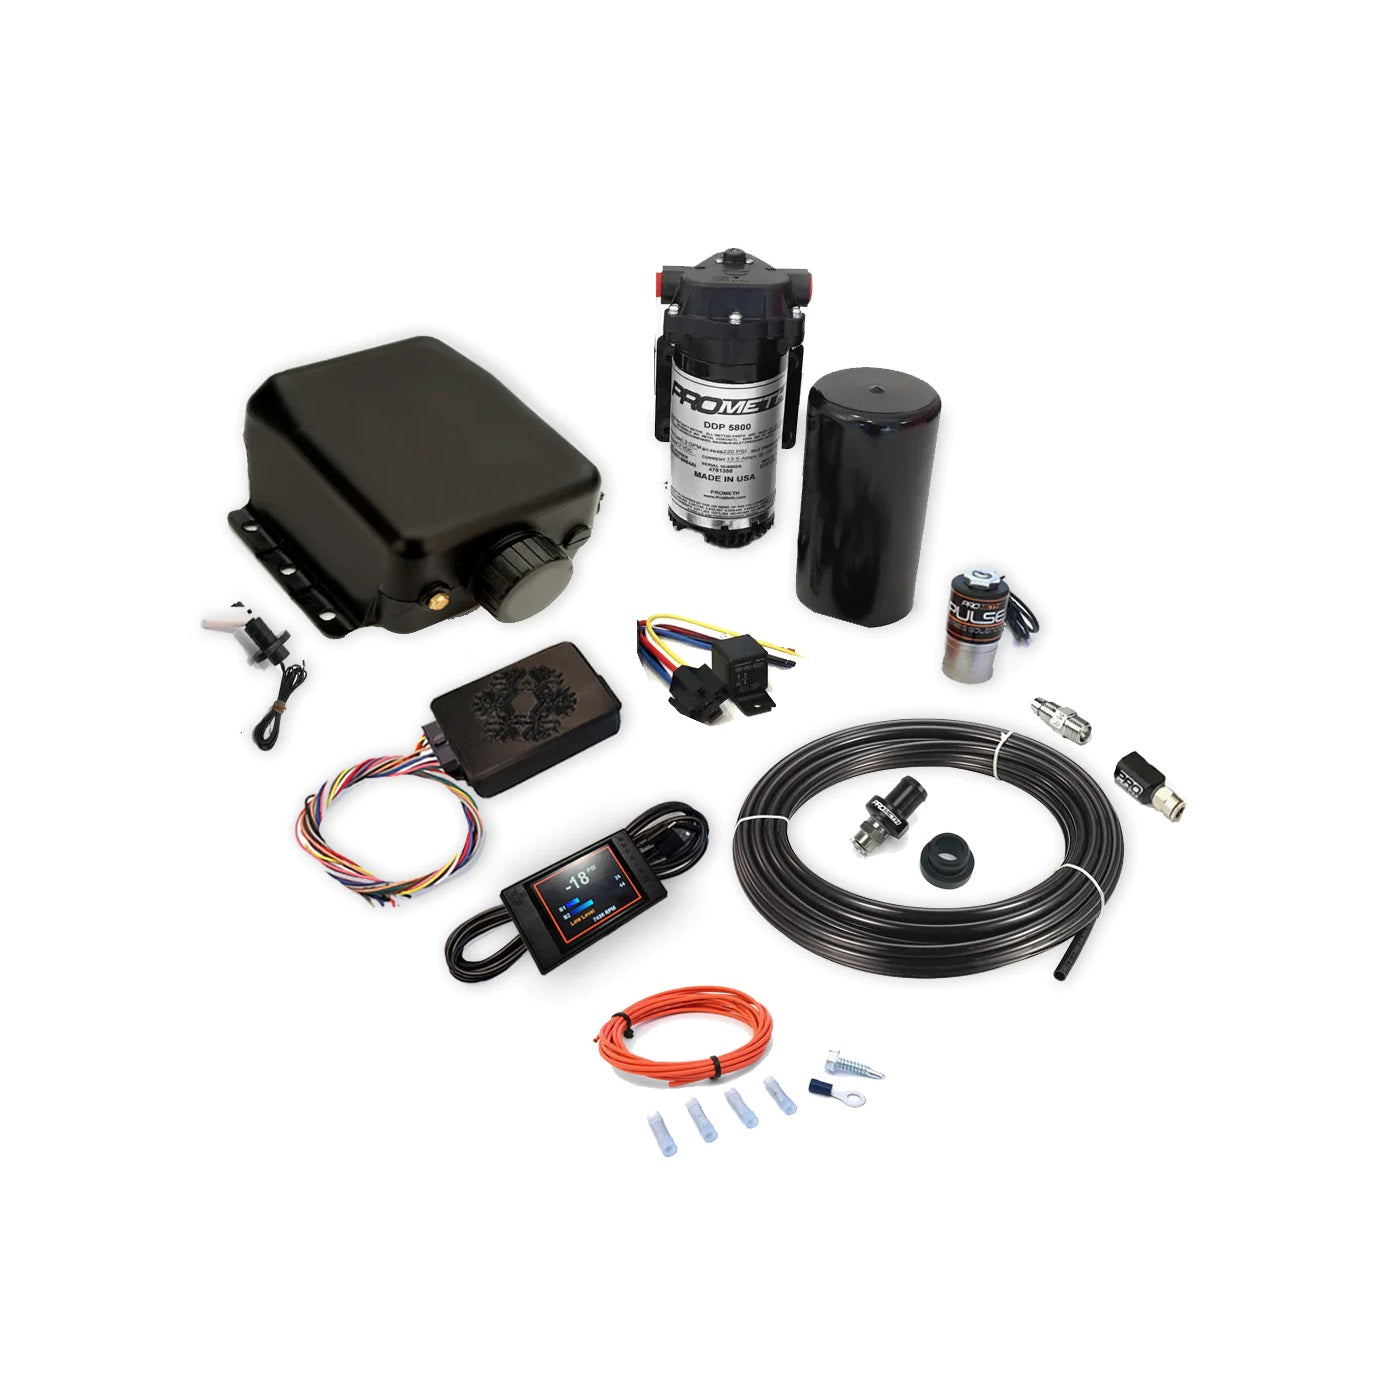 TN FrostByte Methanol Injection Direct Port Kit - No controller